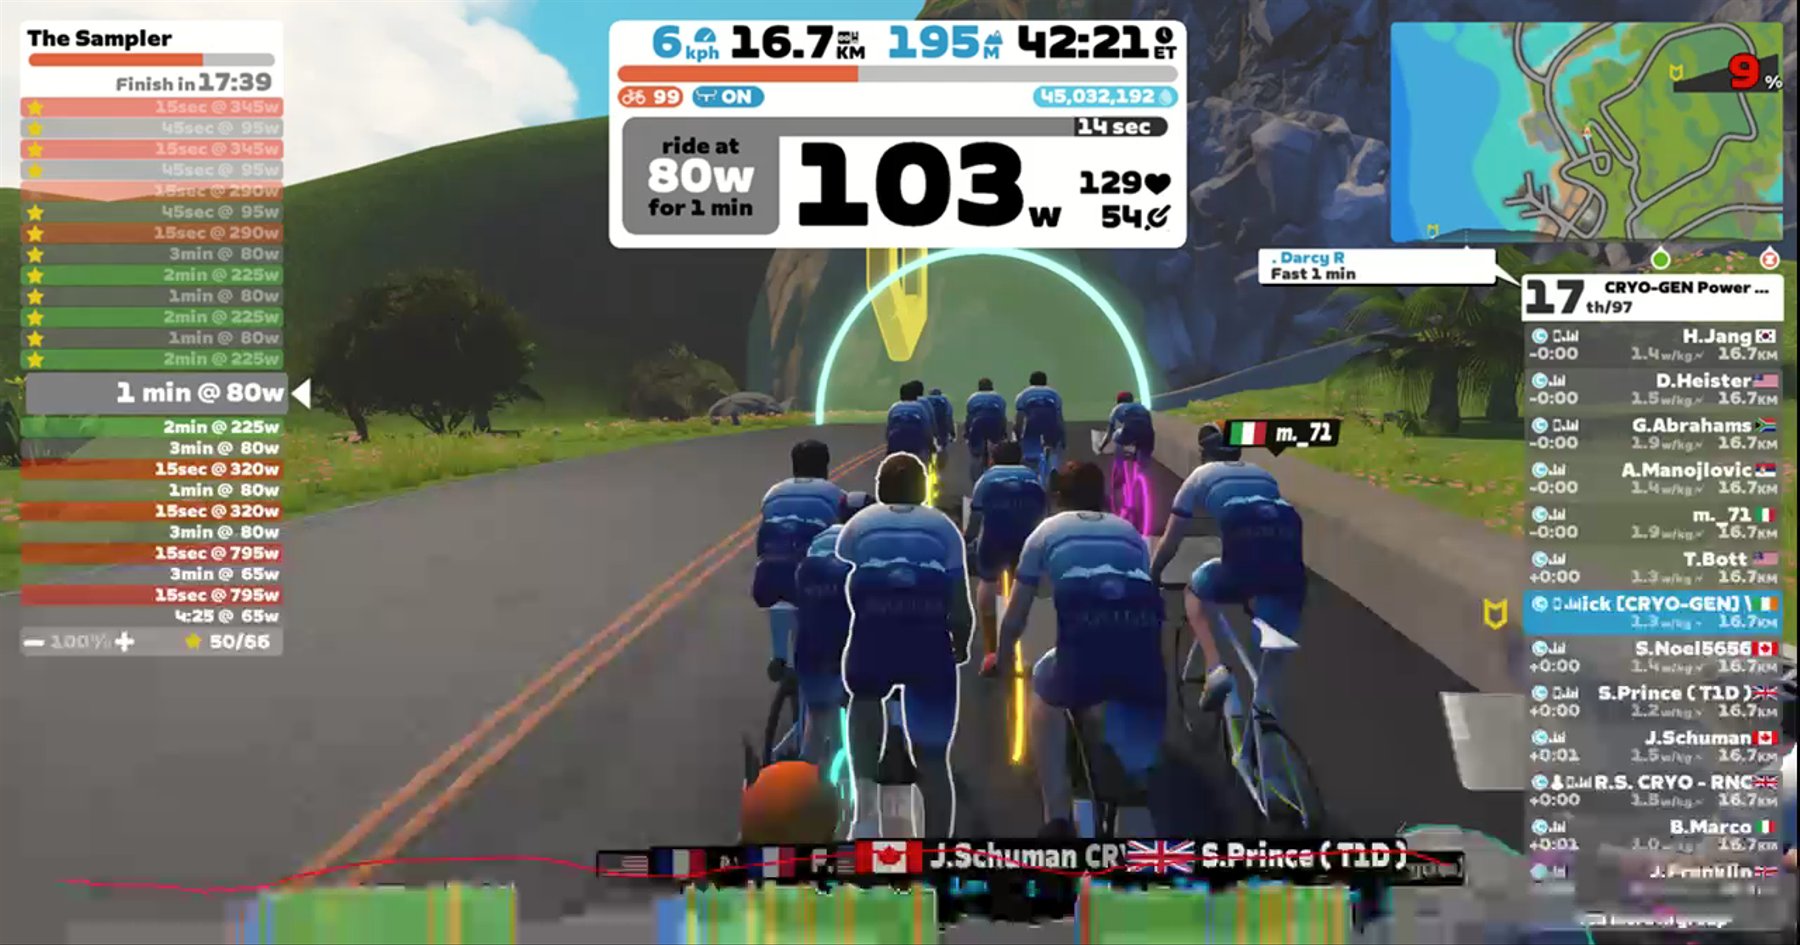 Zwift - Group Ride: CRYO-GEN Power Tuesday Group Ride (C) on Downtown Titans in Watopia- Feel free to join our Zwift Club, Facebook, or Strava group any time for for more info go to www.cryogen.team 